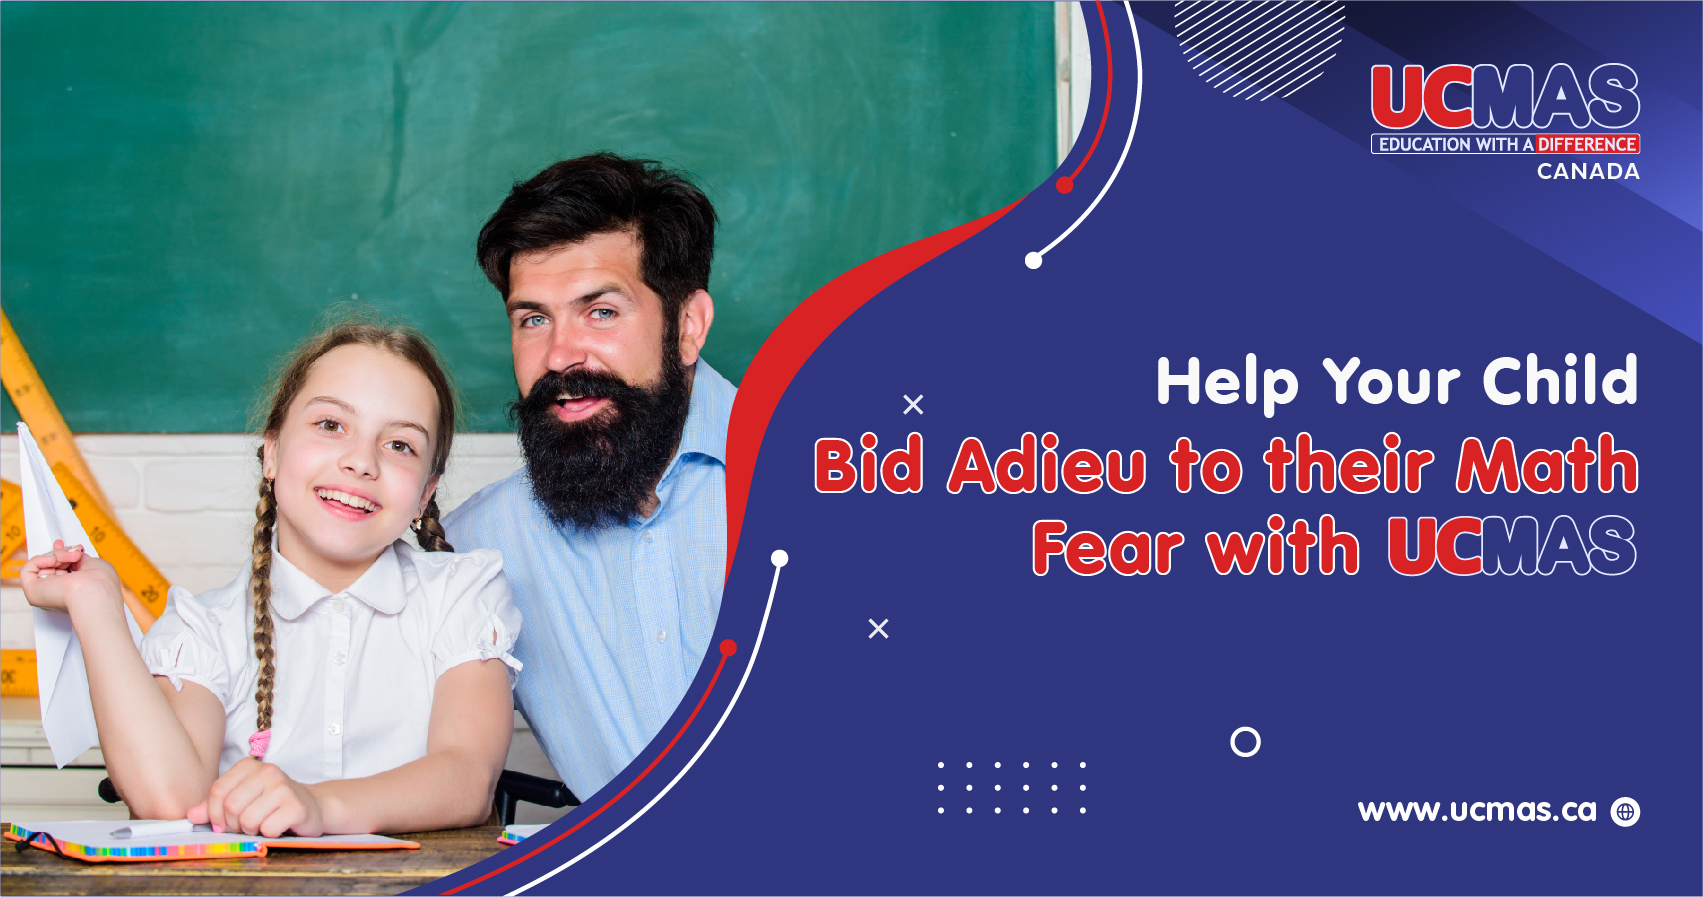 Help Your Child Bid Adieu to their Math Fear with the UCMAS Program